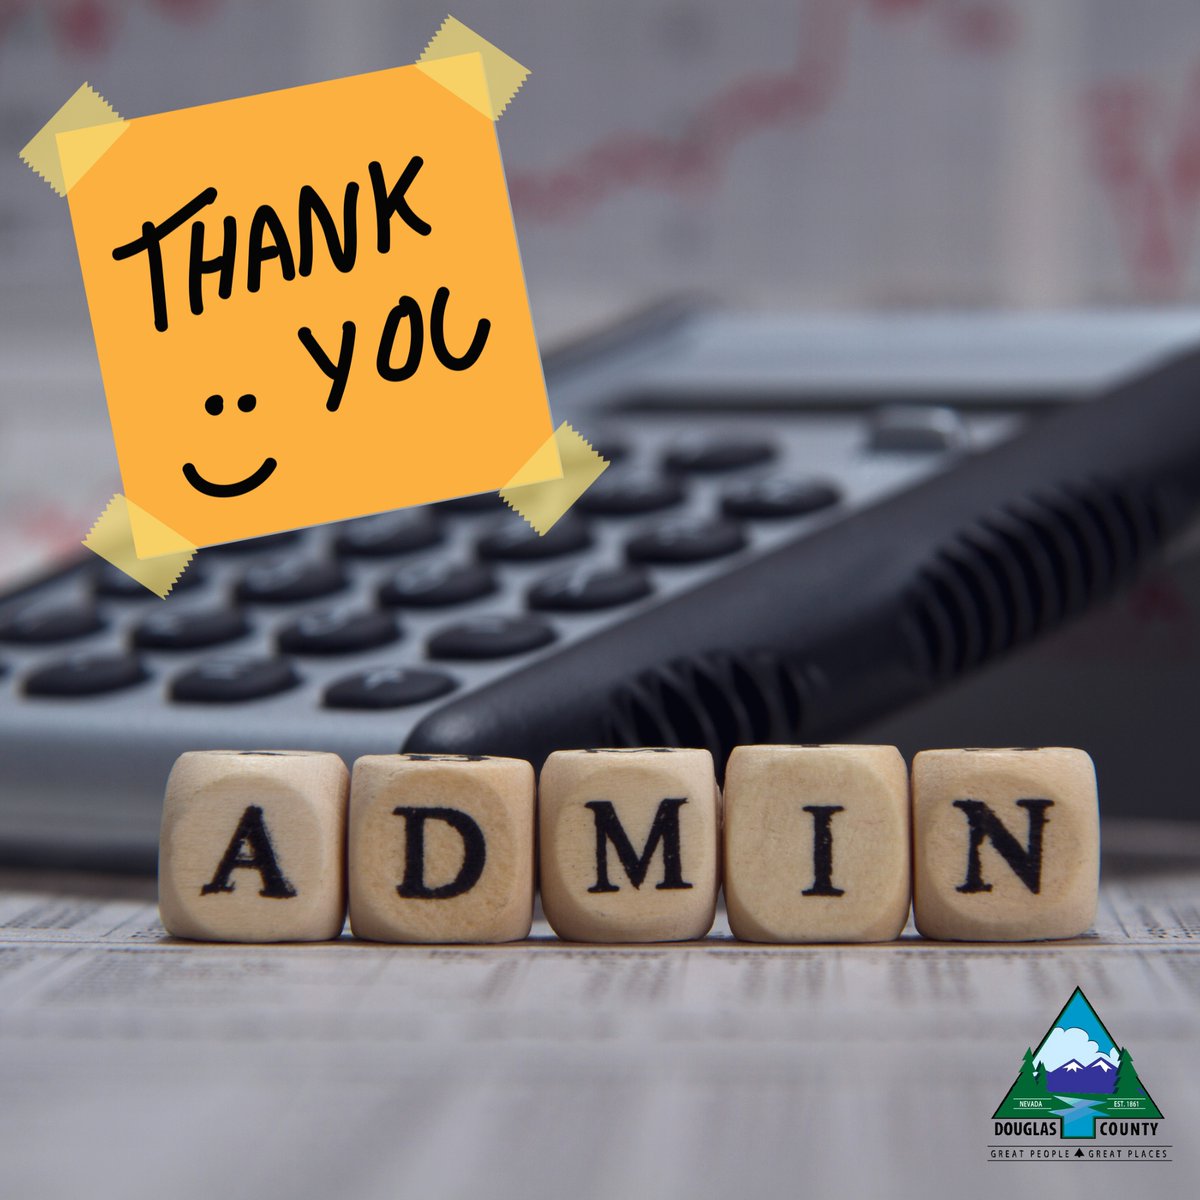 Happy Administrative Professionals Day to all the hardworking and dedicated professionals who keep our offices running smoothly! Here at Douglas County we want to thank all of our Admins for supporting our teams and making our work life easier. 🌟💼💪🙌